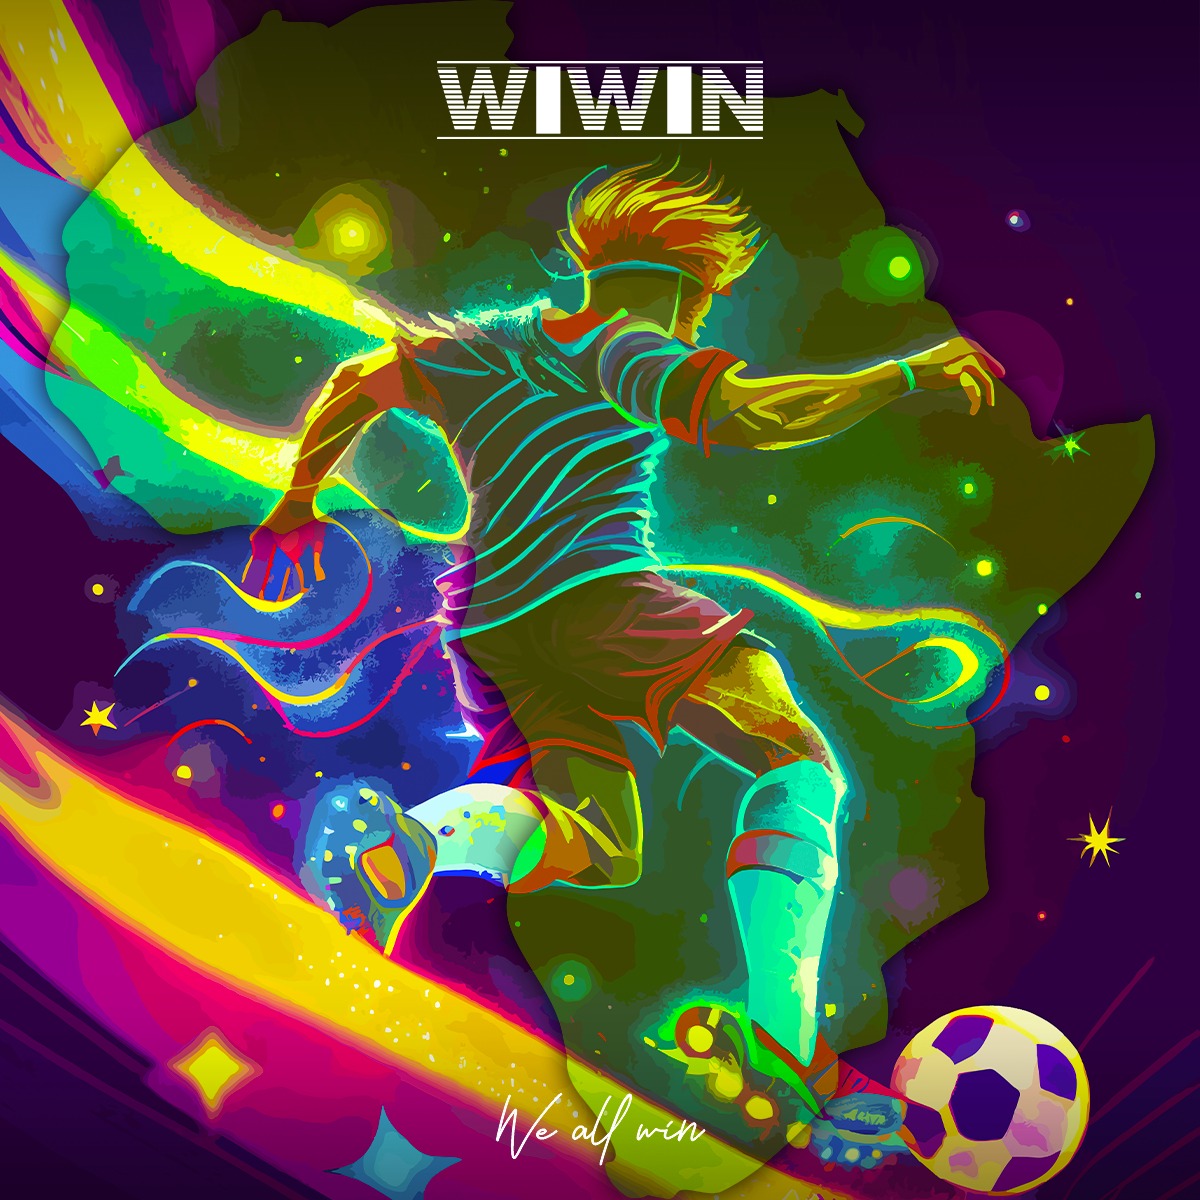 With targeted recruiting💡, professional
 development⚡️  expert coaching & mentorship⚽️🔋📈, Wiwin is poised to become a leading source of top soccer talent in Africa.🌍
#TalentDevelopment #AfricanSoccer